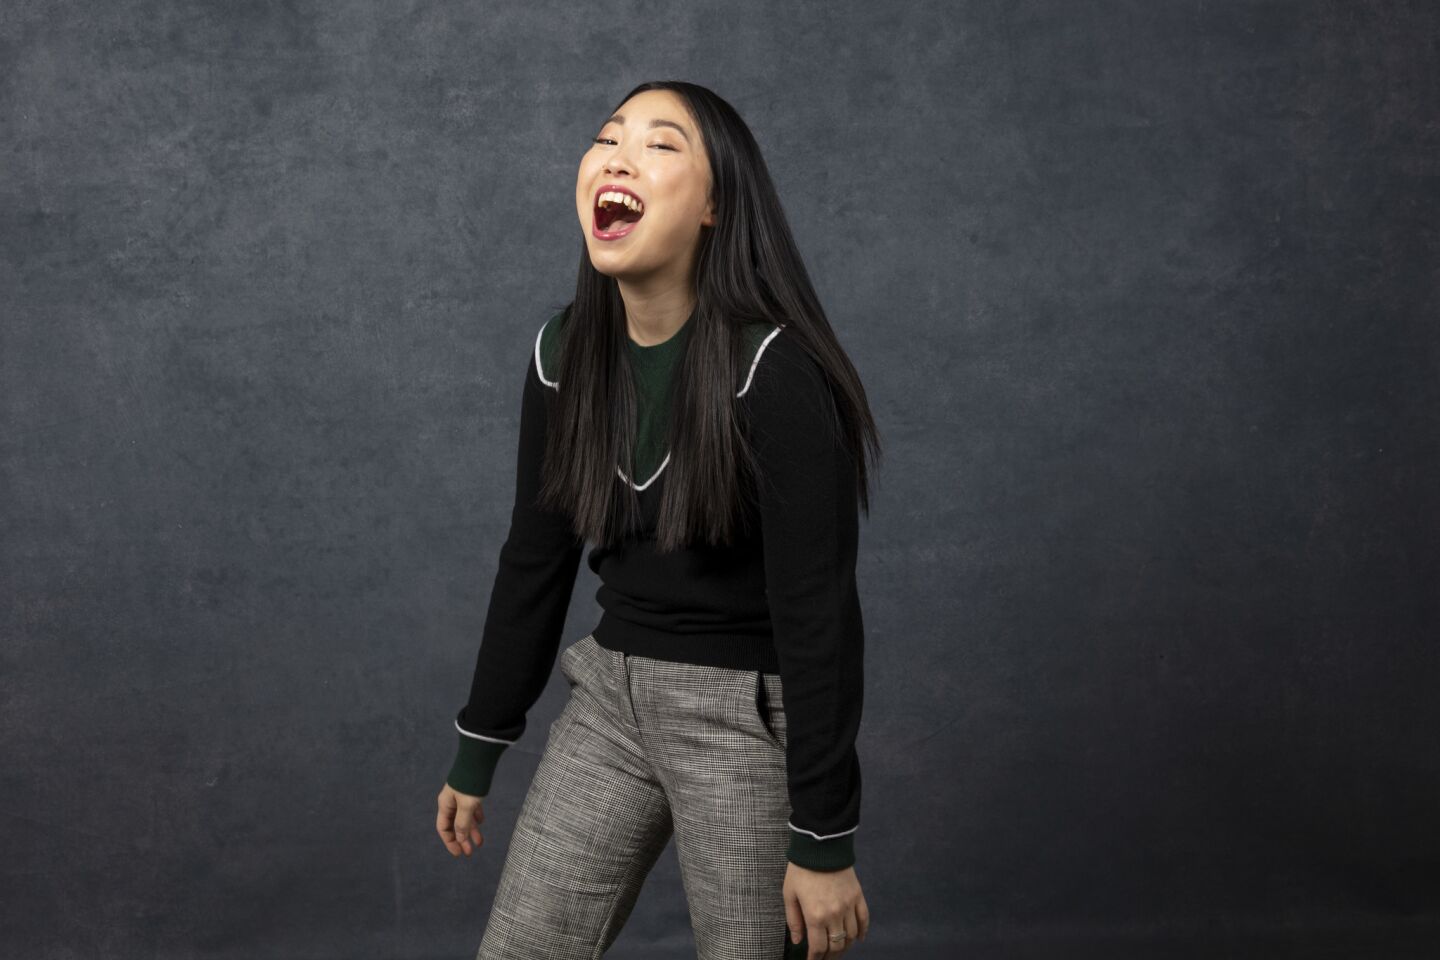 Actress Awkwafina from the film "The Farewell."